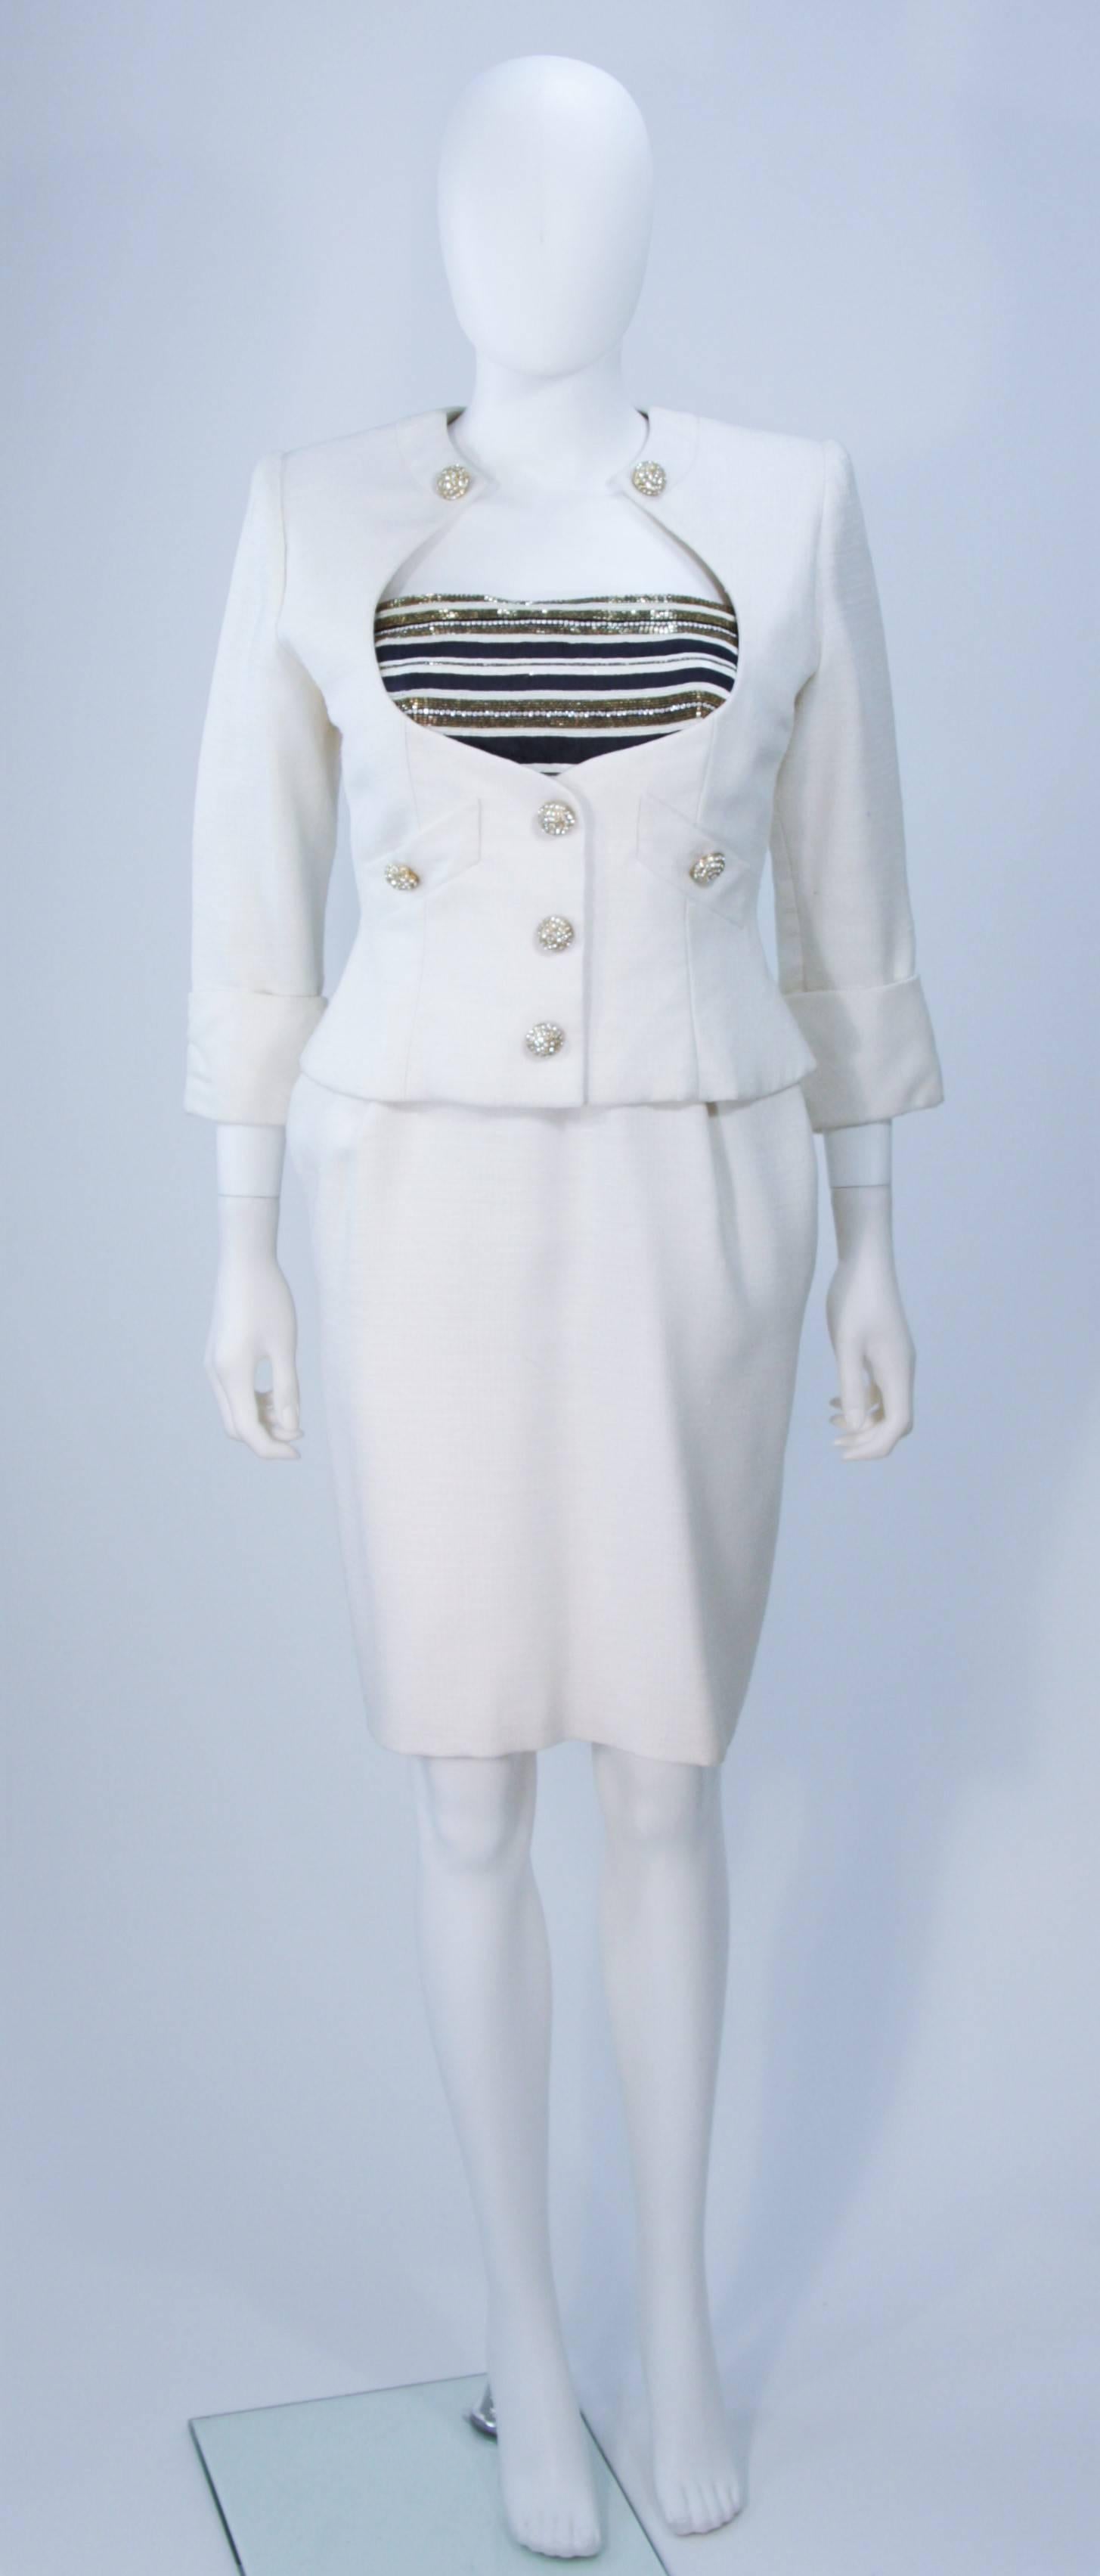  This Jean Patou Couture dress ensemble is composed of a beautiful white textured linen which is accented with rhinestones and beading. The jacket features an open style bust with gold rhinestone button closures and front pockets. The lovely